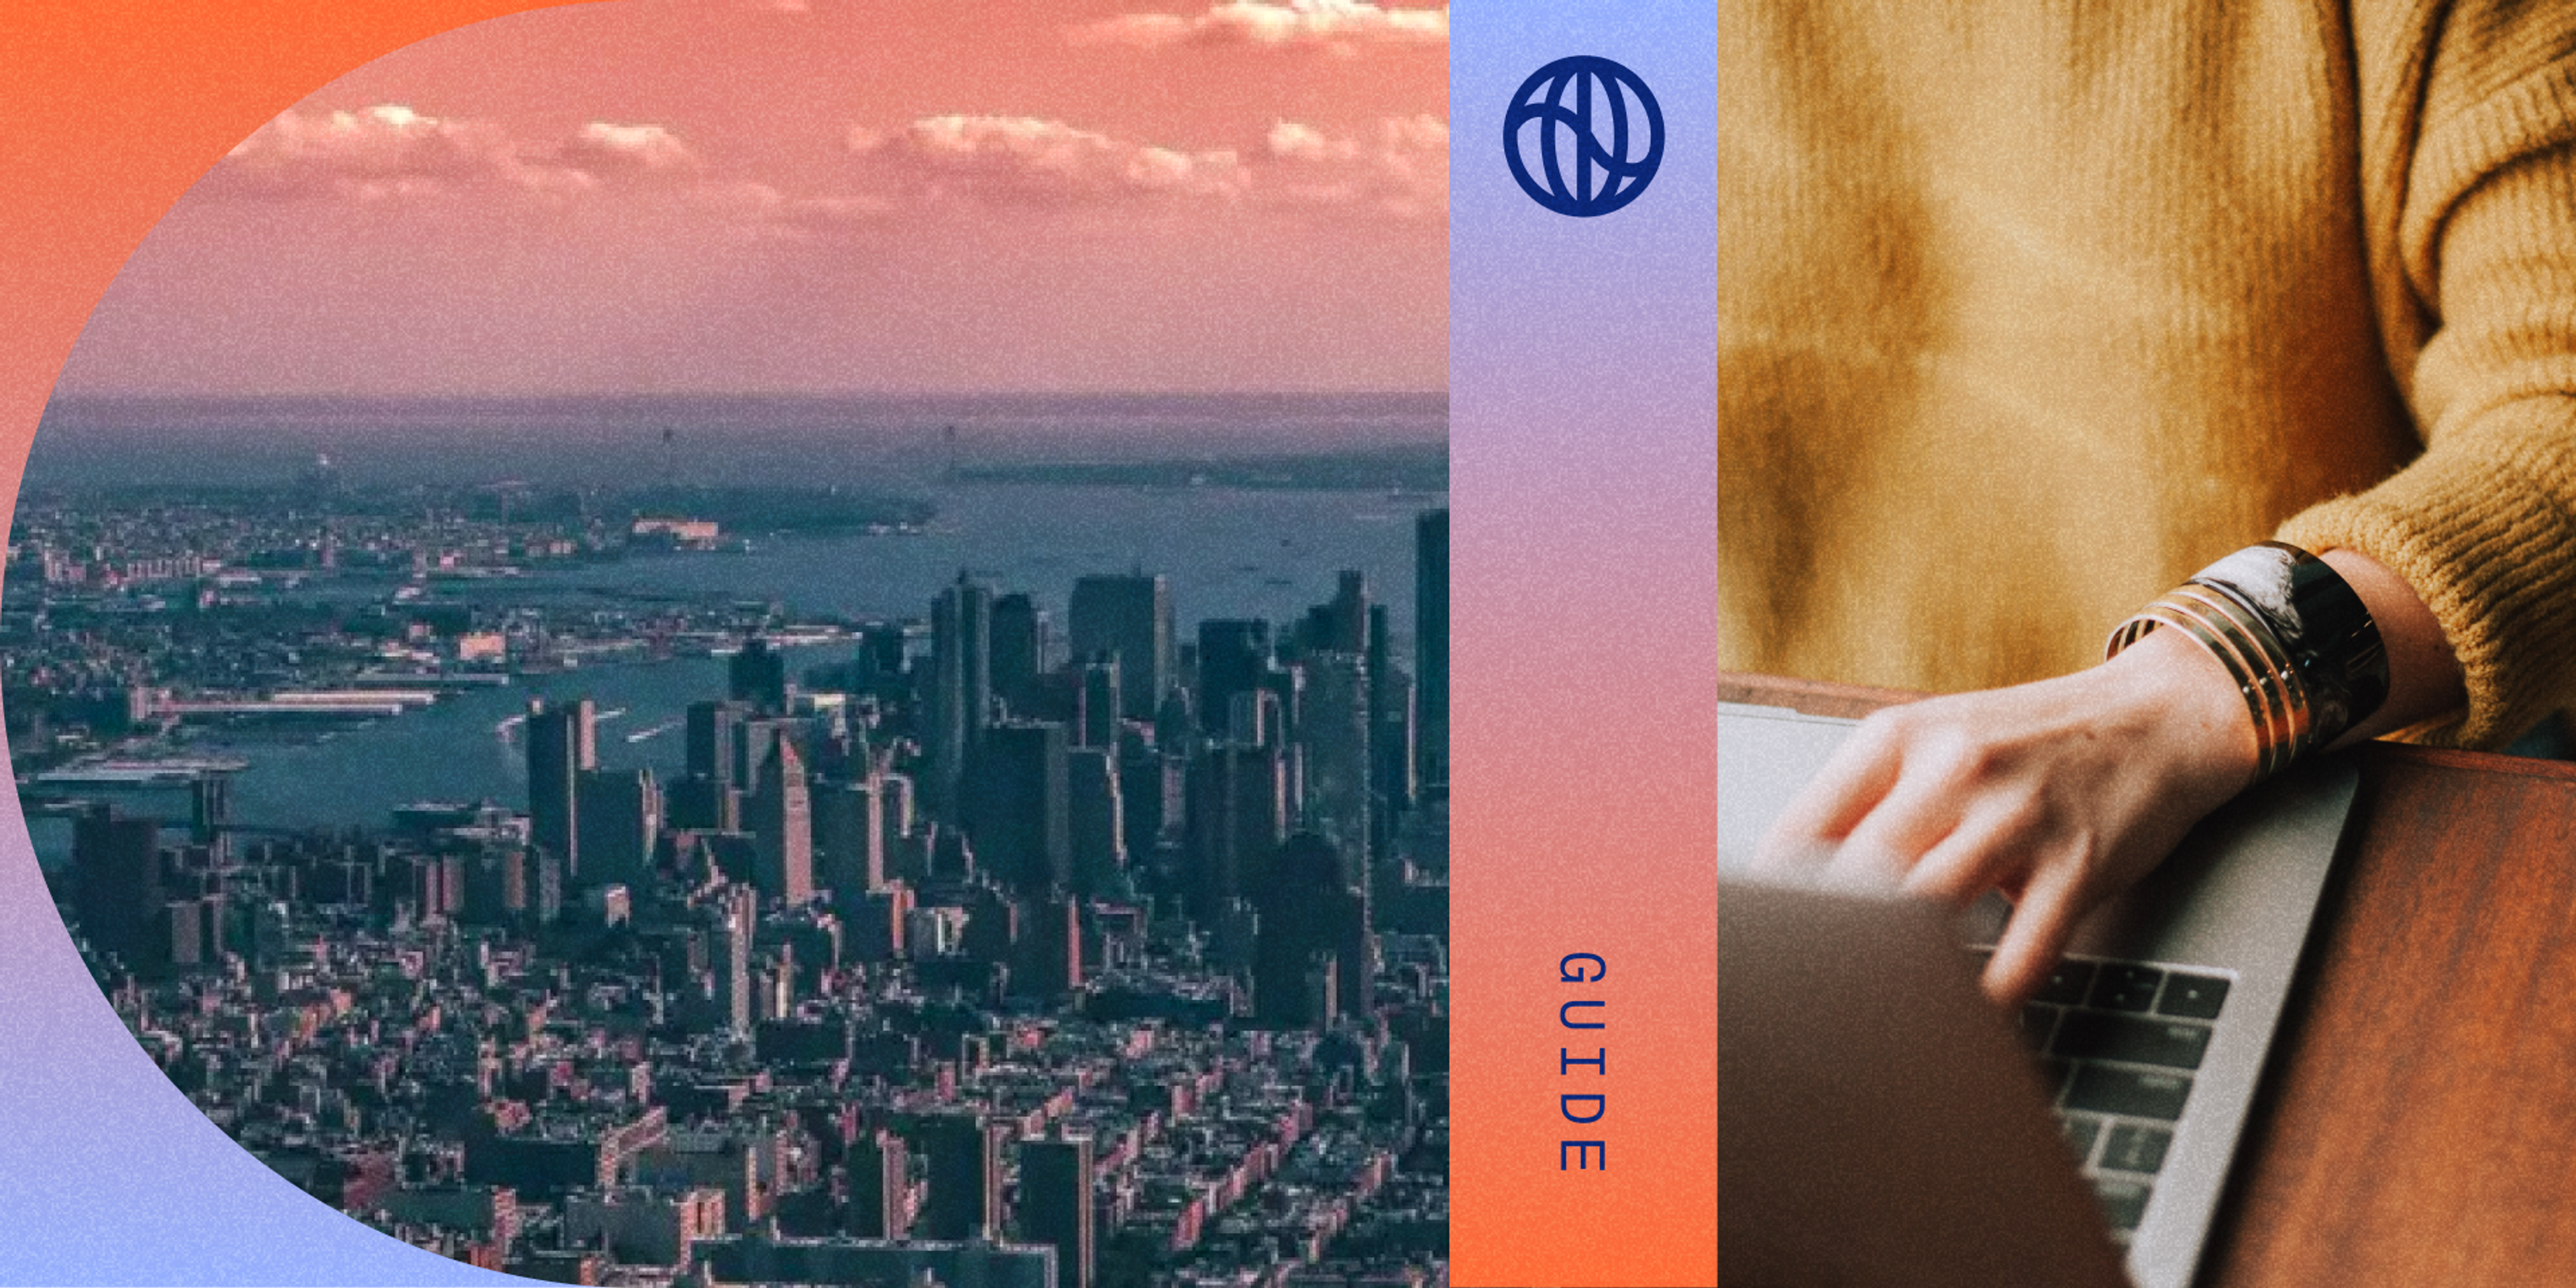 Aerial photo of downtown Manhattan and photo of someone typing on a keyboard